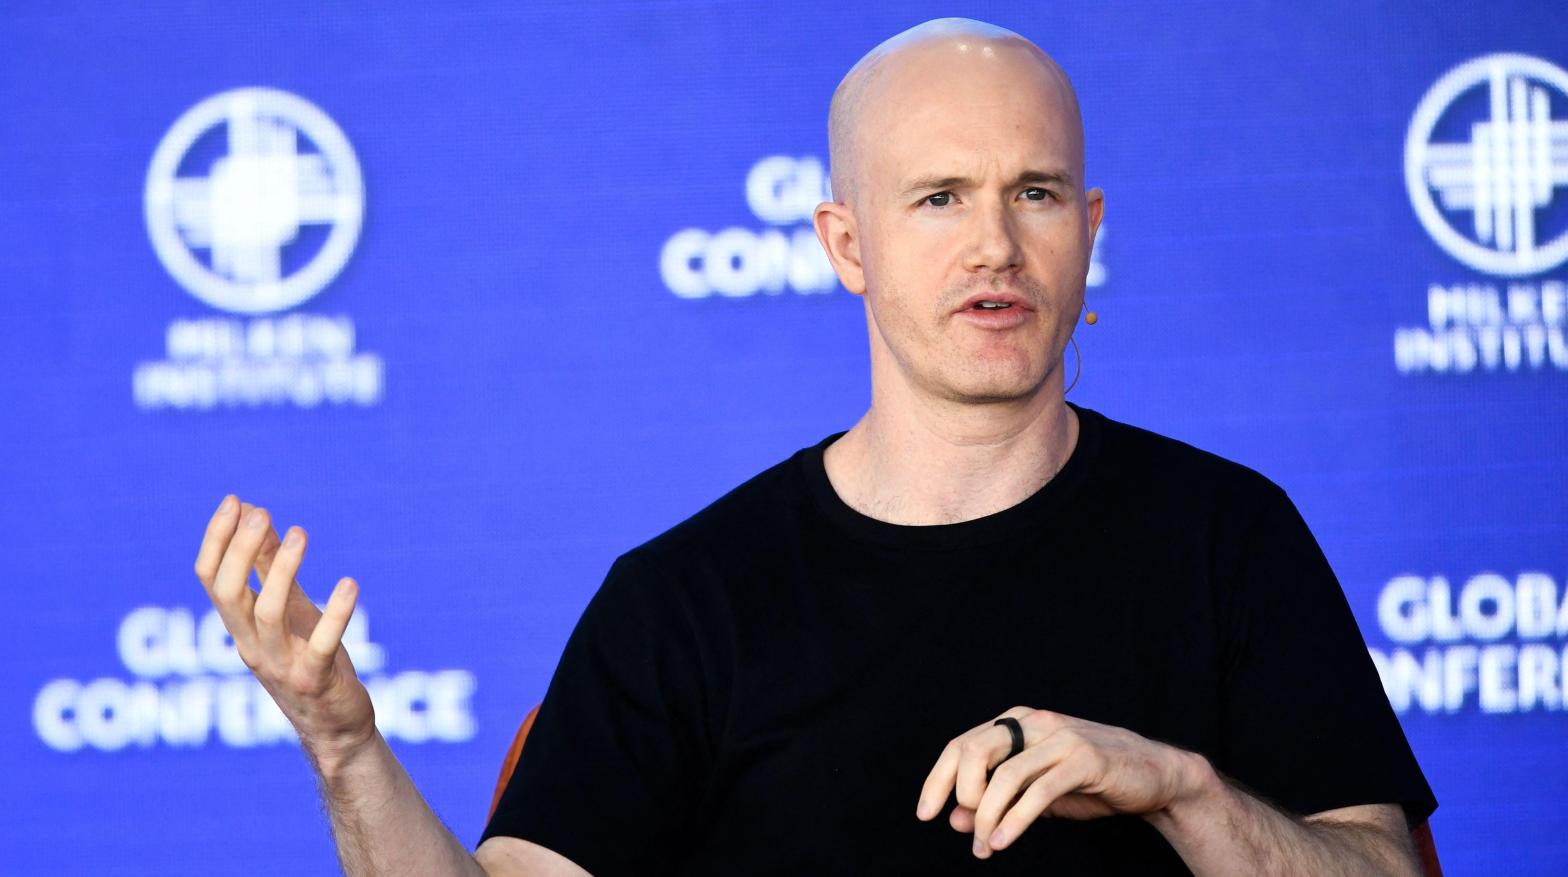 Brian Armstrong, CEO and Co-Founder of Coinbase. (Photo: PATRICK T. FALLON / Contributor, Getty Images)